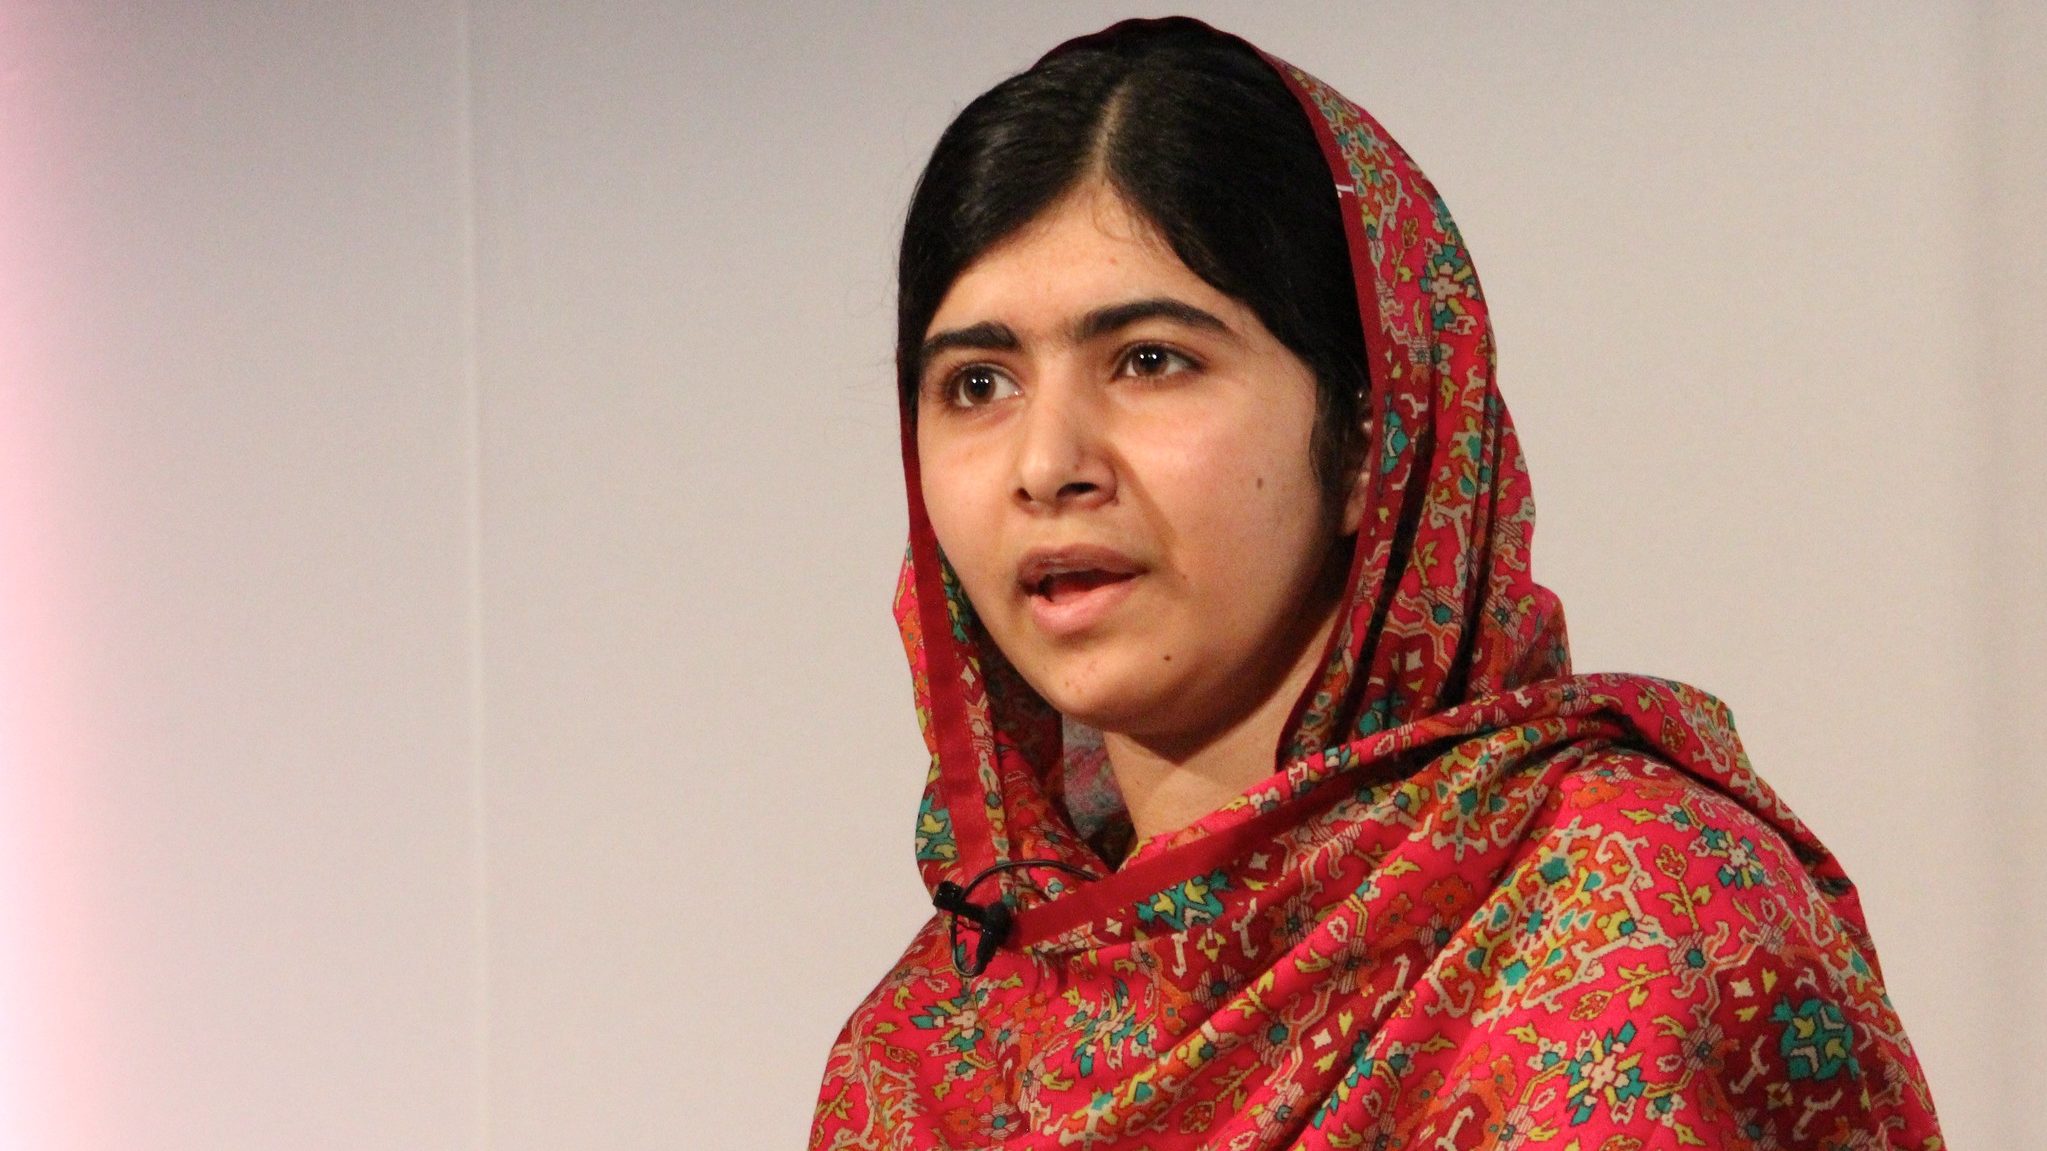 Will There Be Another Malala?